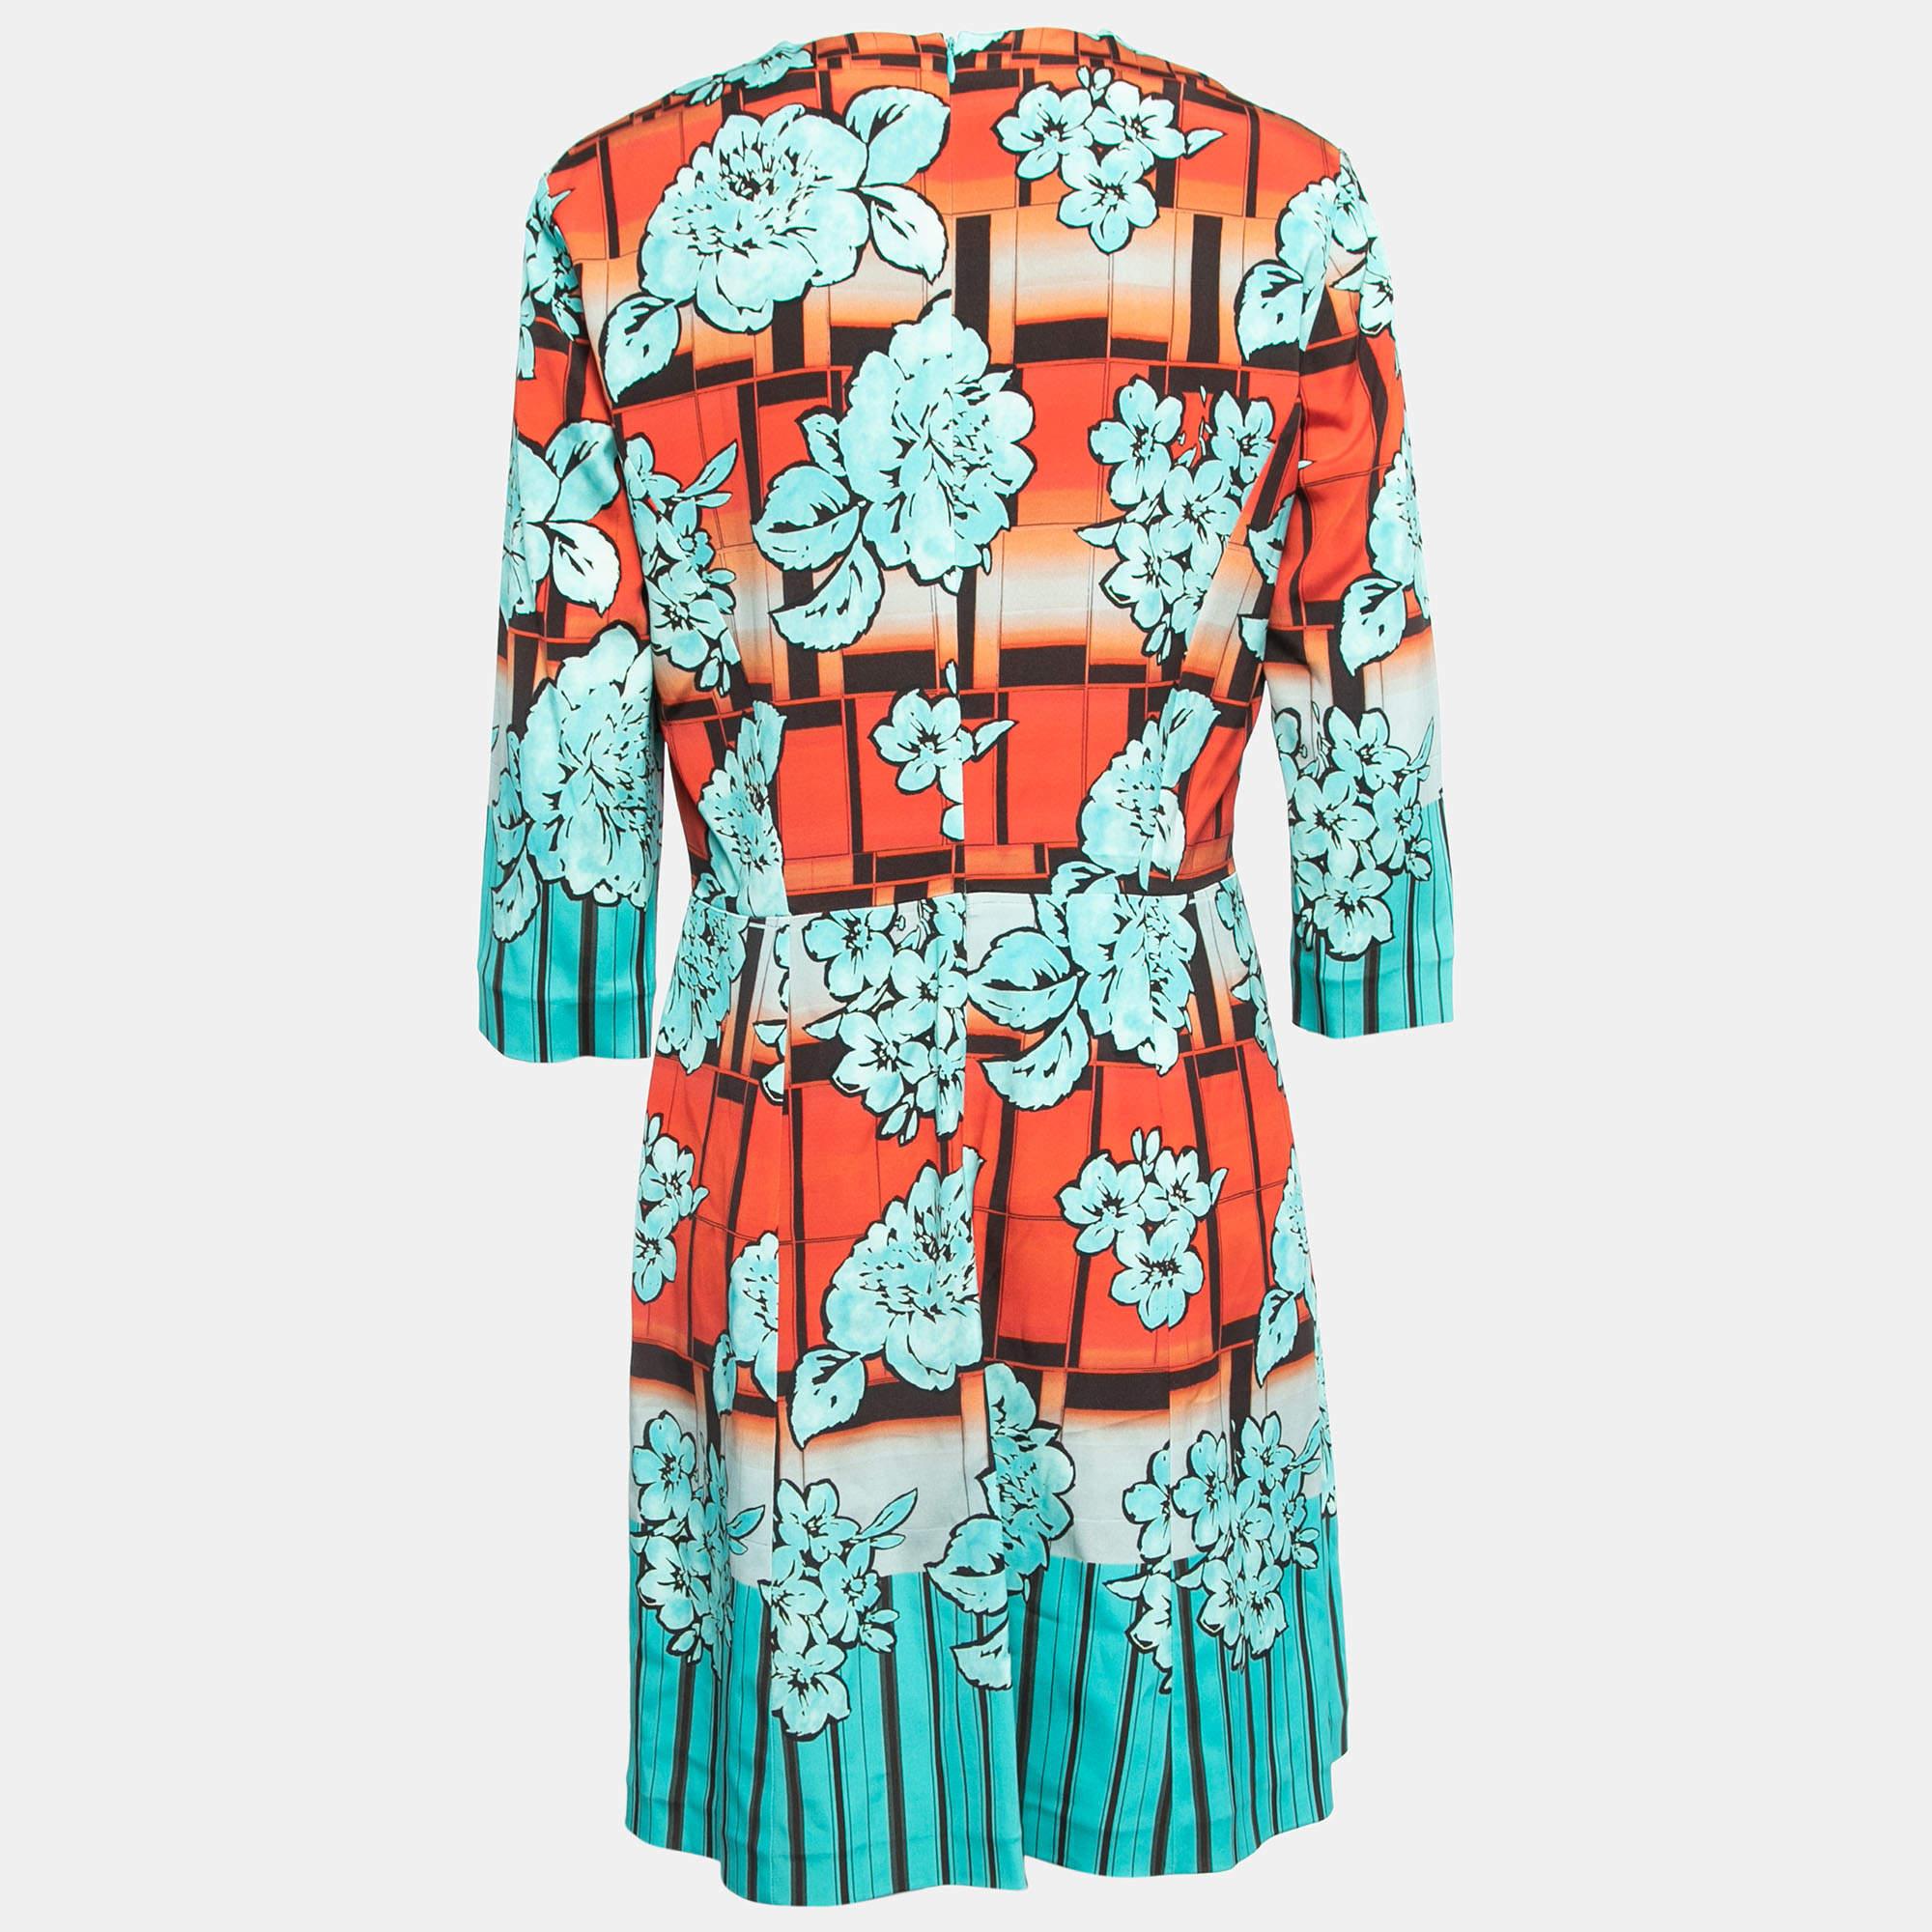 Invest in creating a well-curated wardrobe with 'wearable' pieces like this Etro floral-printed short dress. Tailored beautifully, the dress has a lovely neckline and a comfortable fit.

